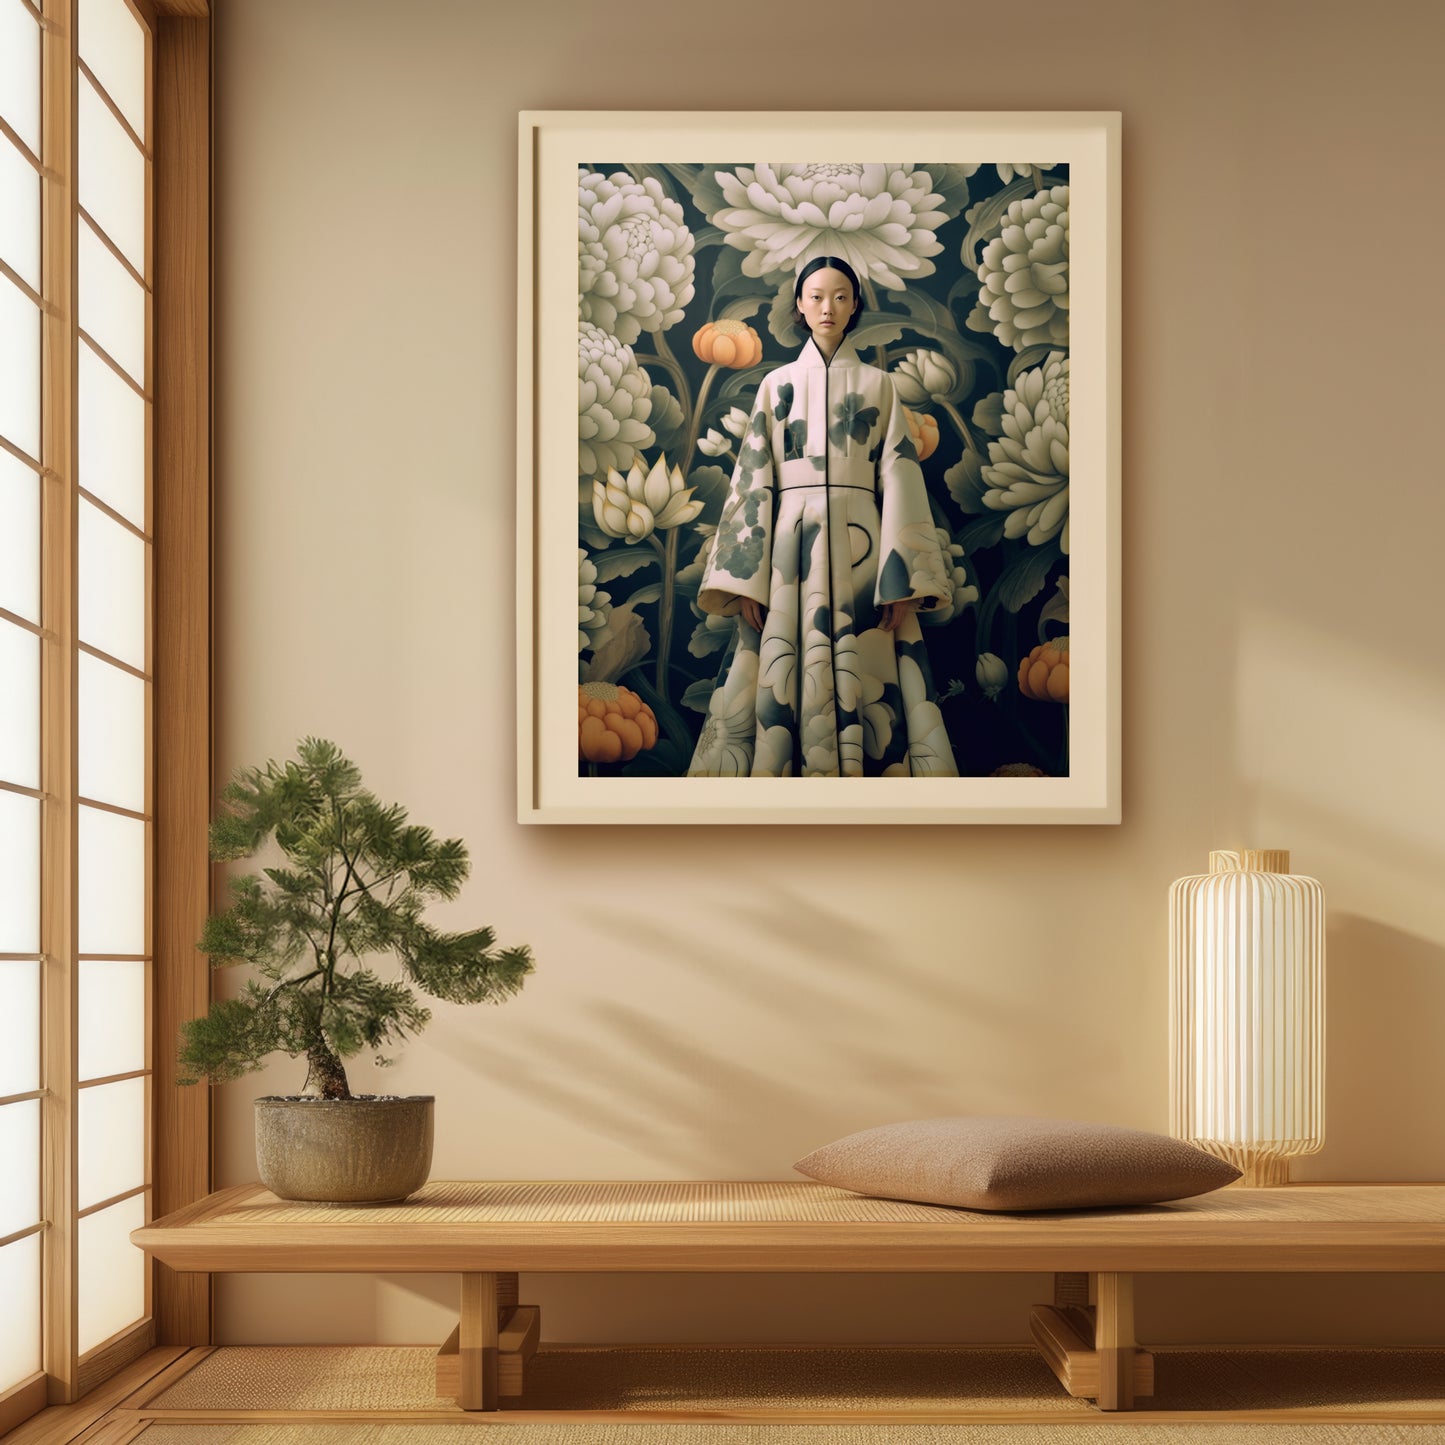 Art print showcasing a woman in a traditional kimono with monochromatic floral patterns, surrounded by large, intricately detailed flowers in muted tones. This fine art print captures a timeless, elegant scene.